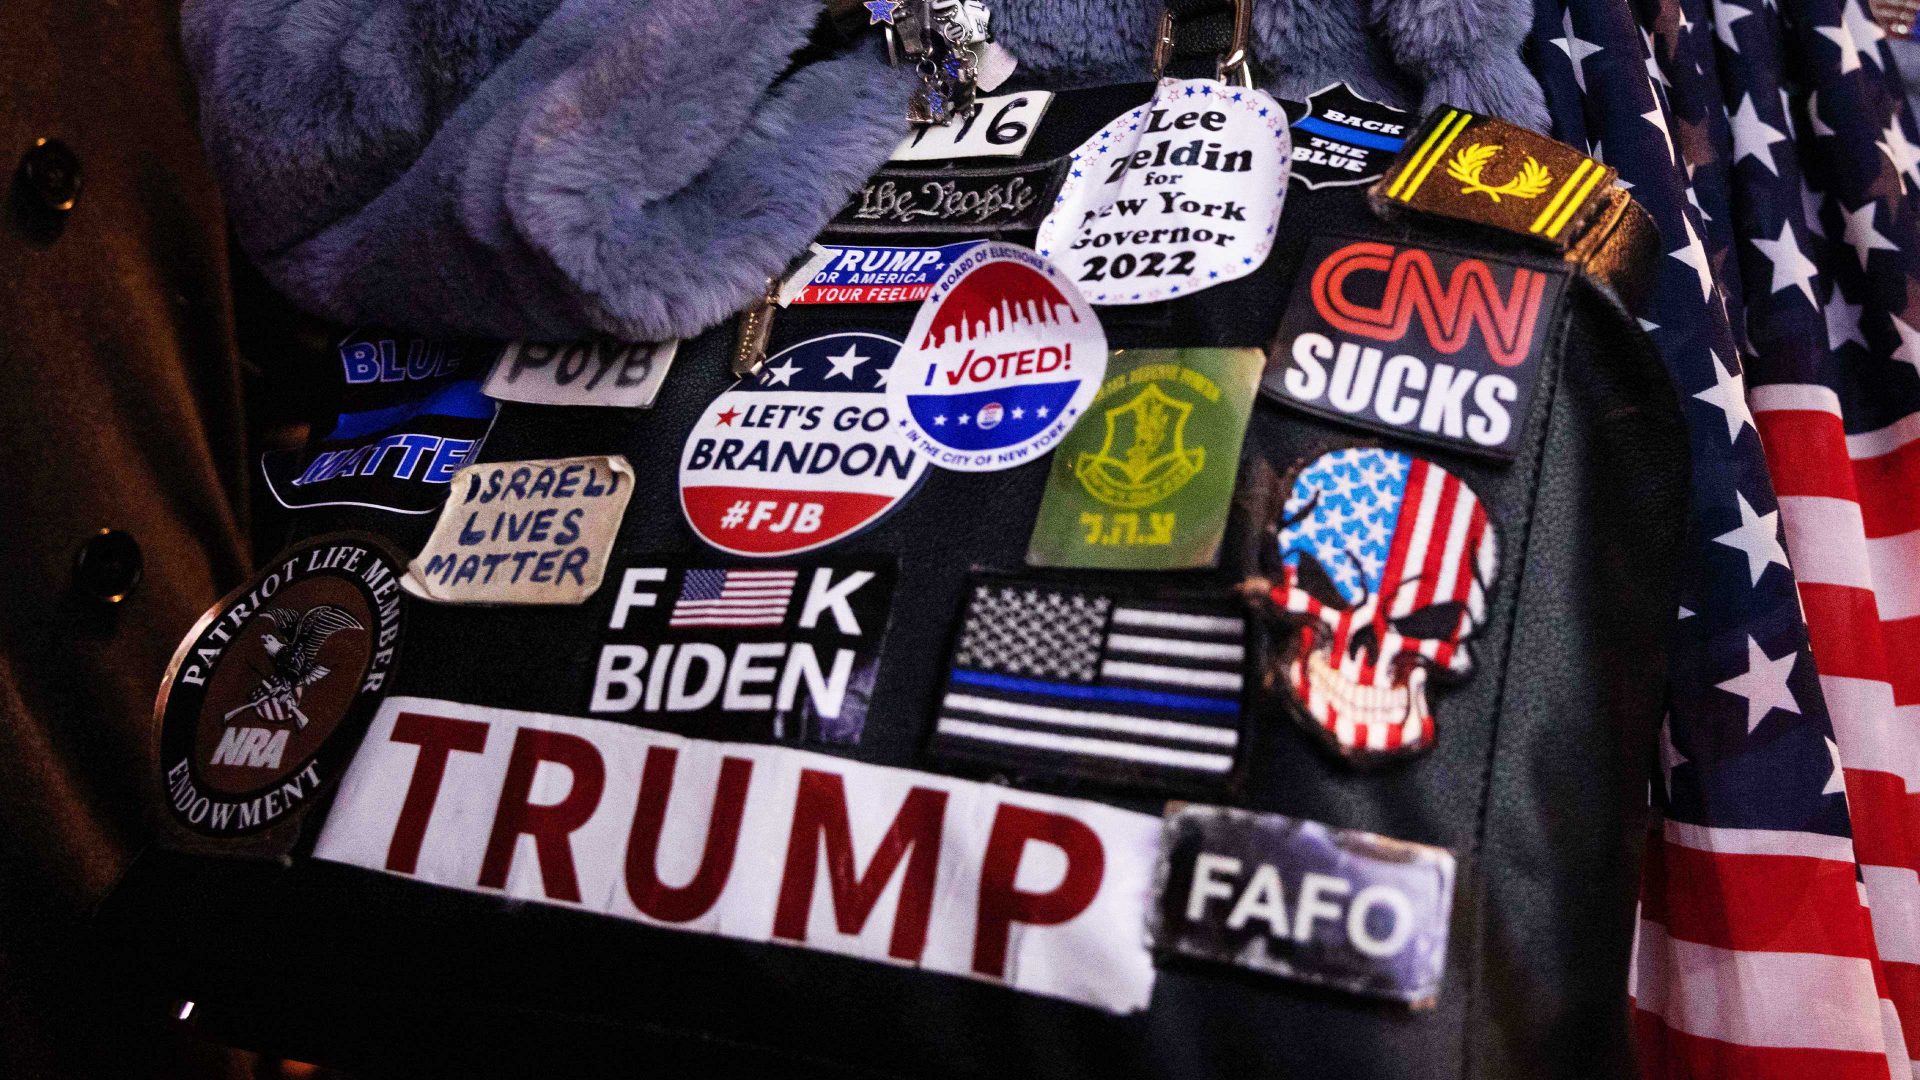 A woman holds a bag covered with pro-Trump stickers as 
supporters watch live results at an election party in New York City, November 8 2022. Photo: Yuki Iwamura/AFP/Getty